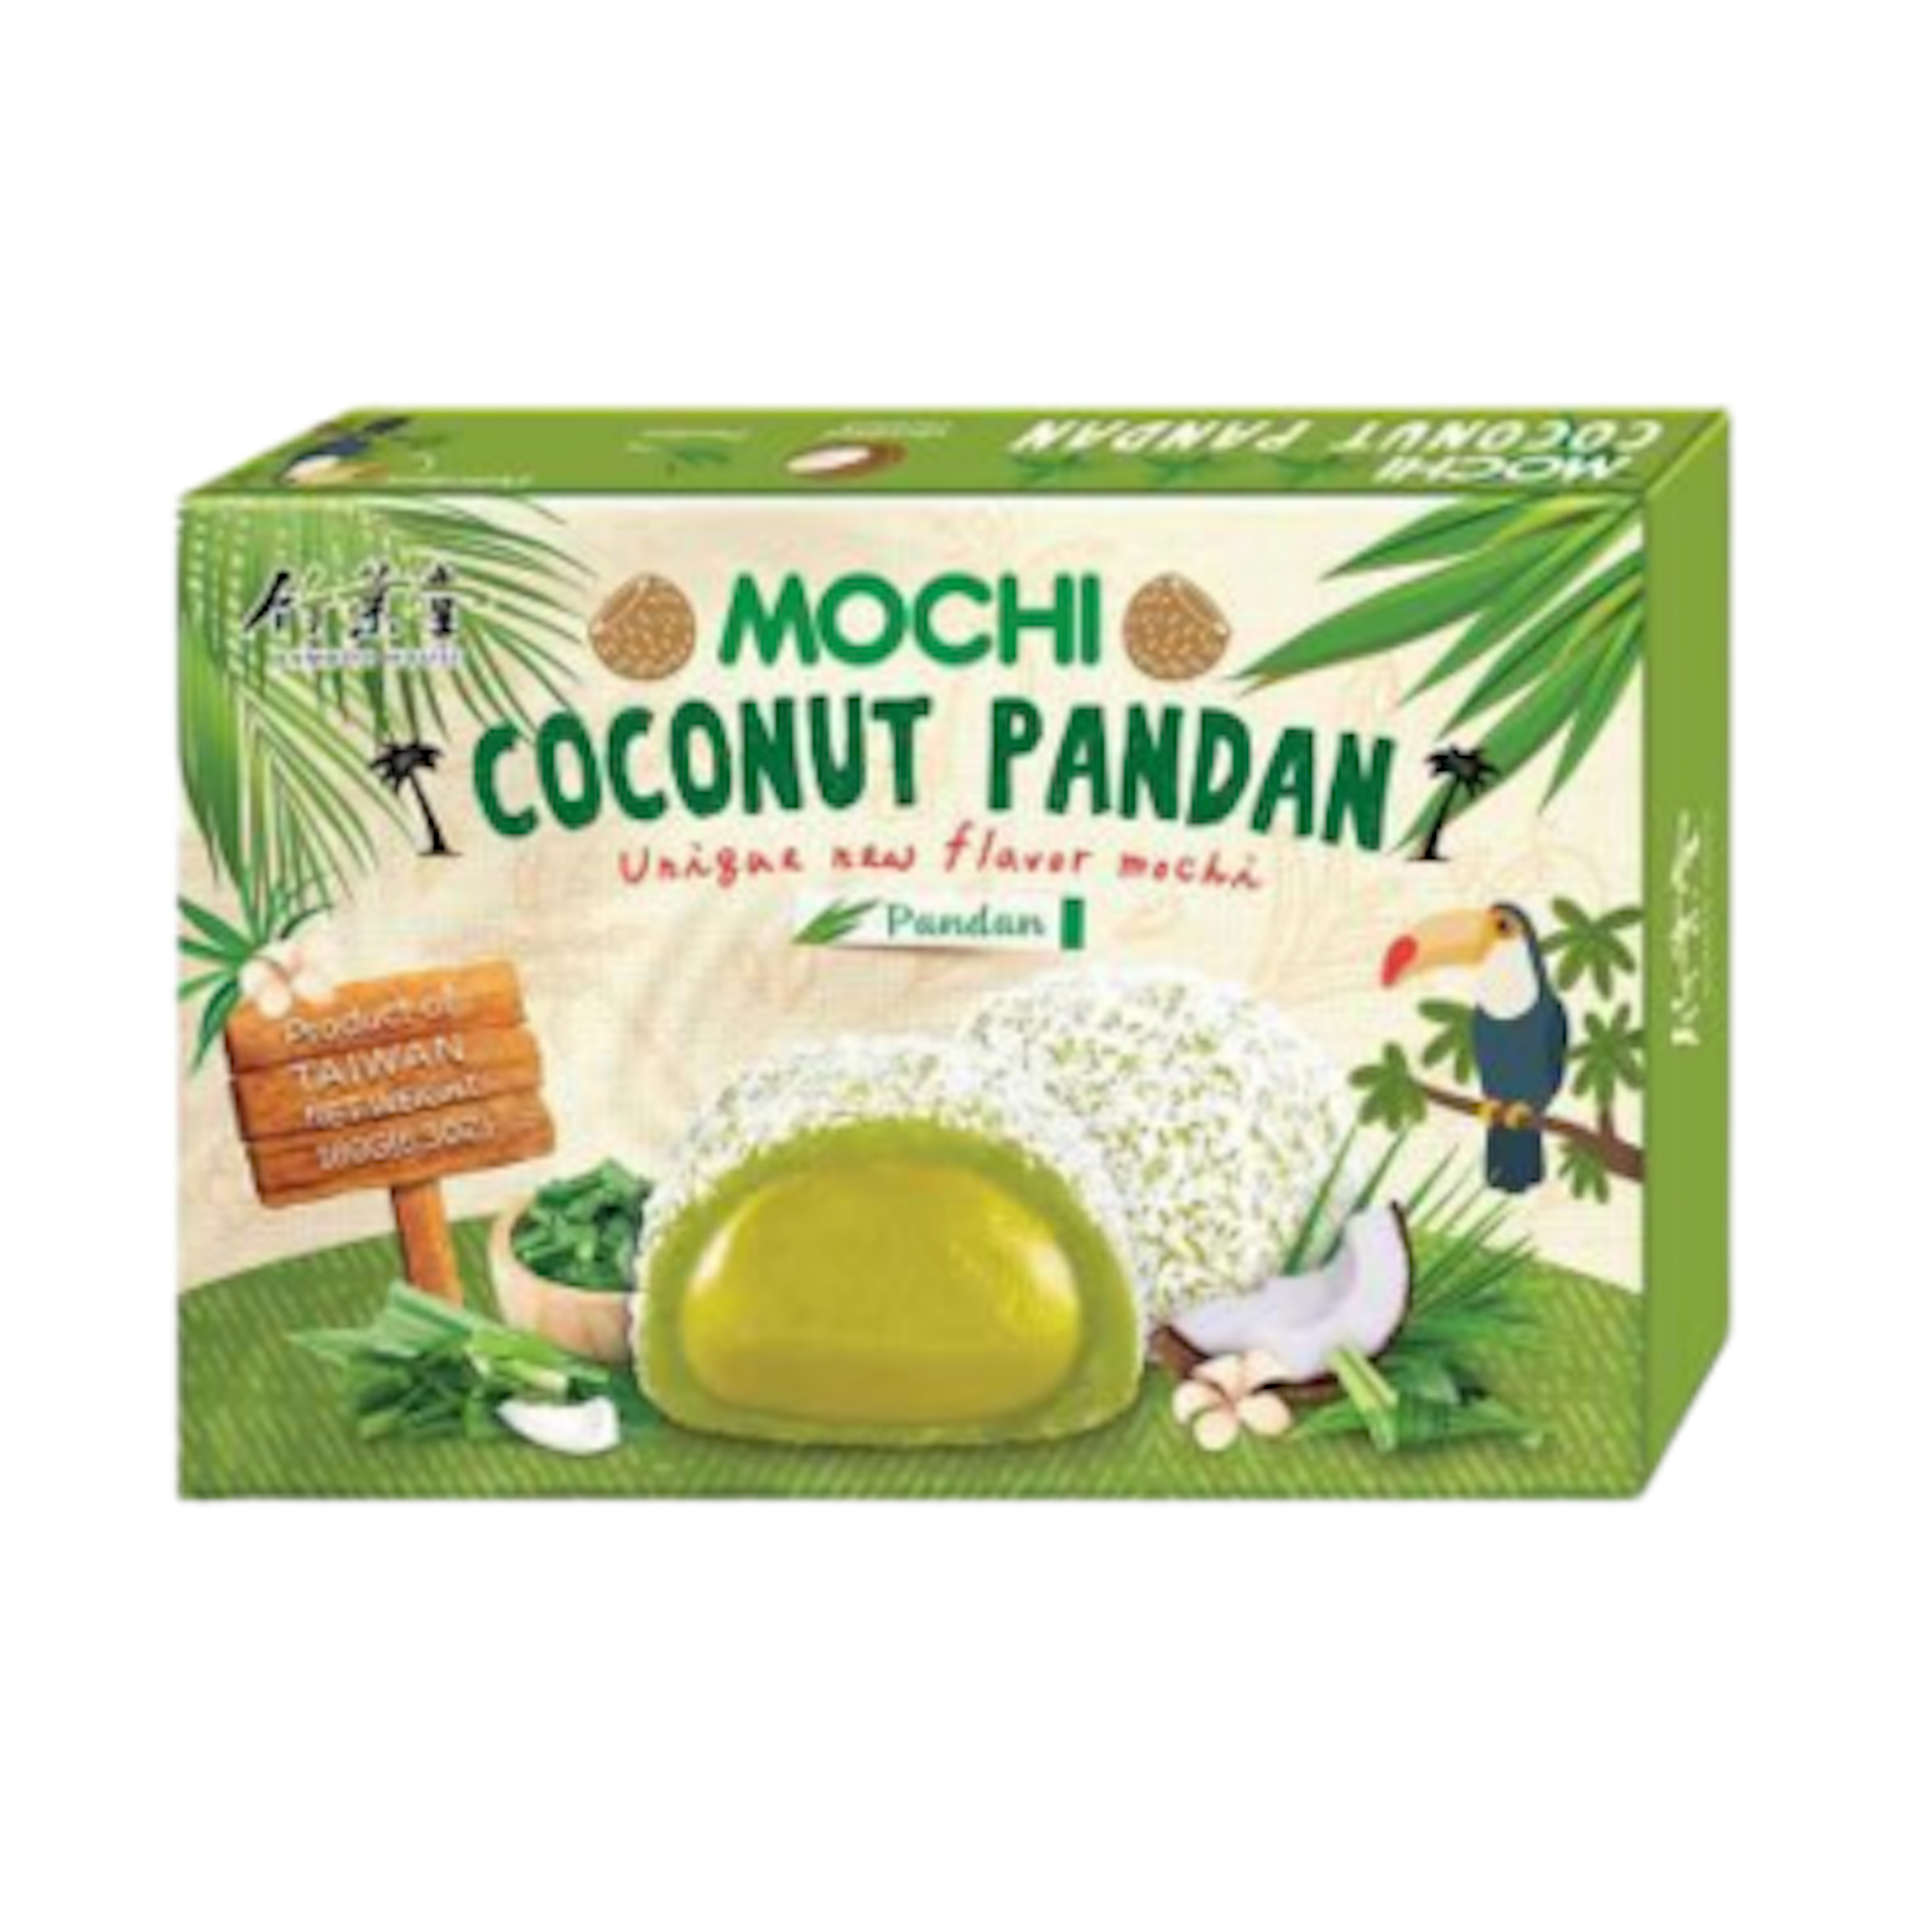 Bamboo House Double Fillings Mochi Coconut Pandan 180g - Delicious and Tender Japanese Sweet